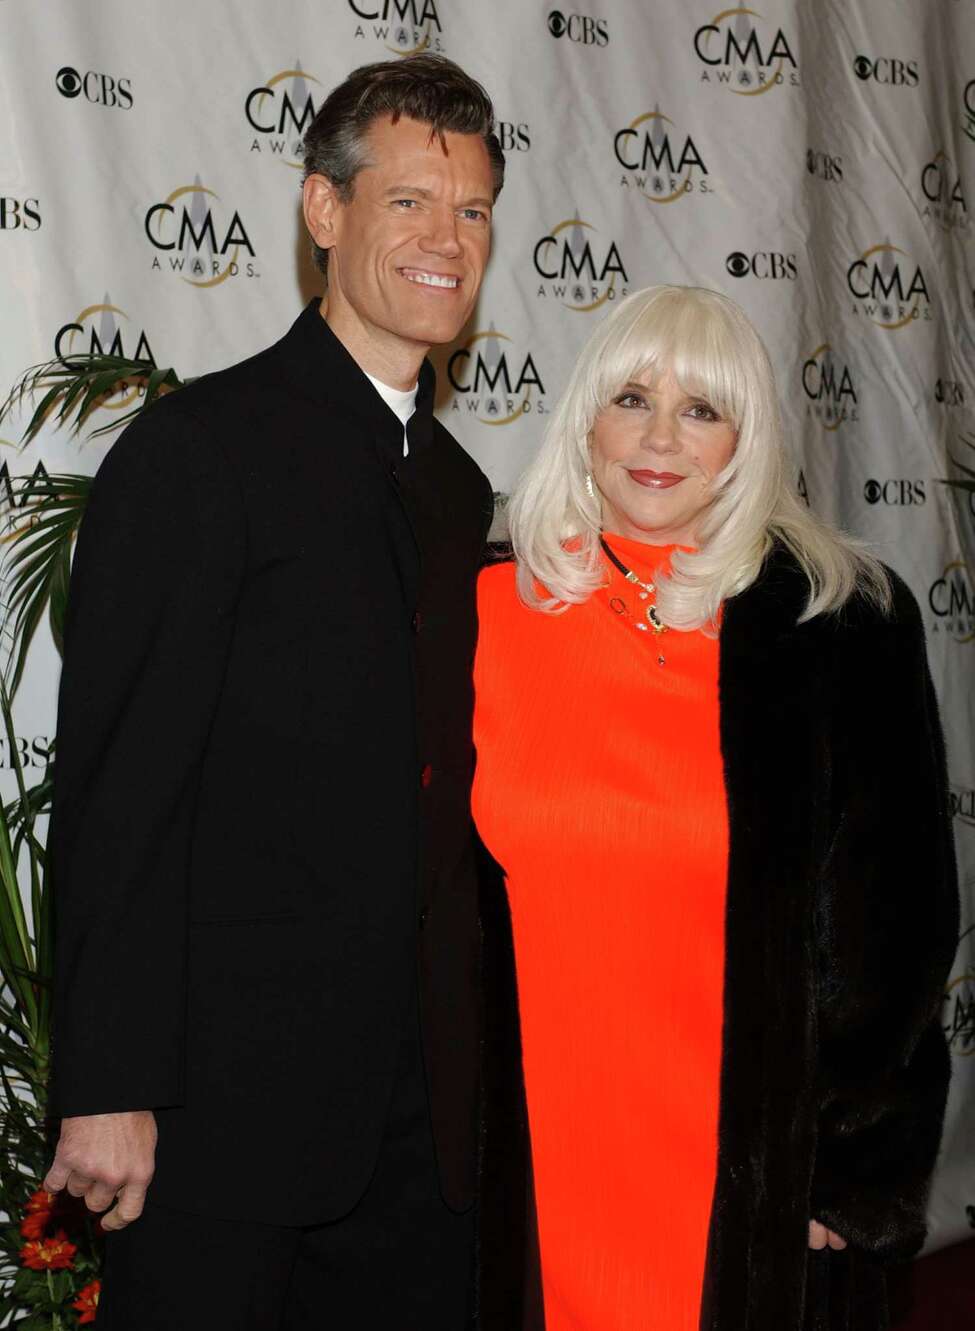 Randy Travis arrested naked, charged with DWI